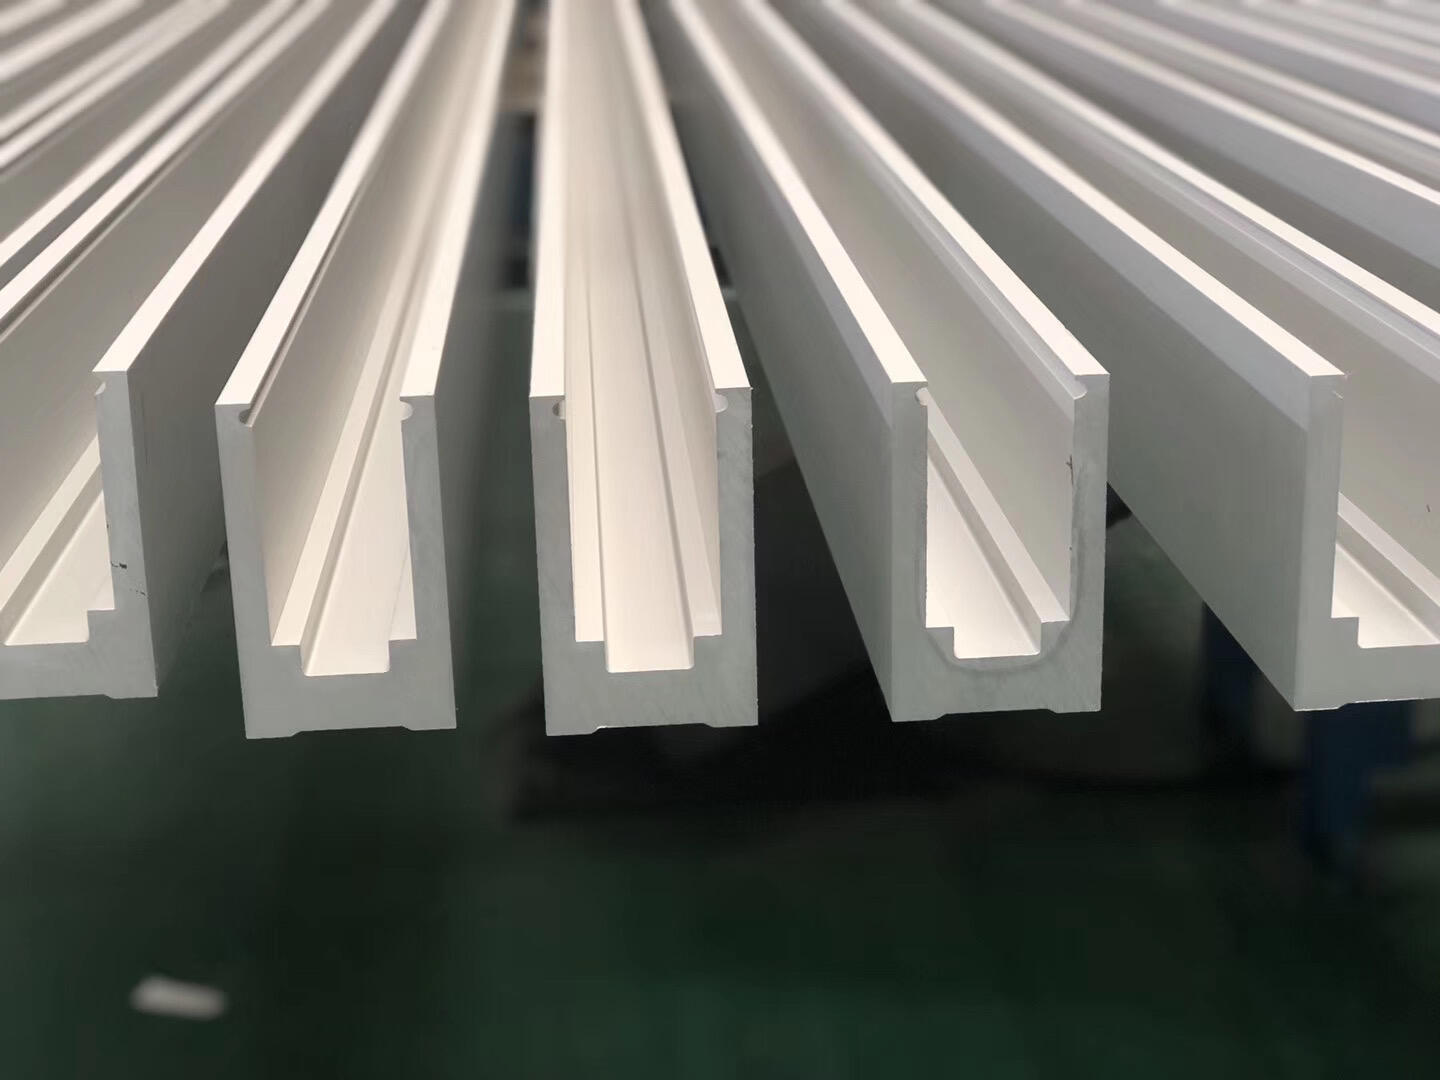 Custom Extruded Aluminum Profiles Precision Engineered For Construction And Industrial Applications Durable And Versatile Aluminum Sections